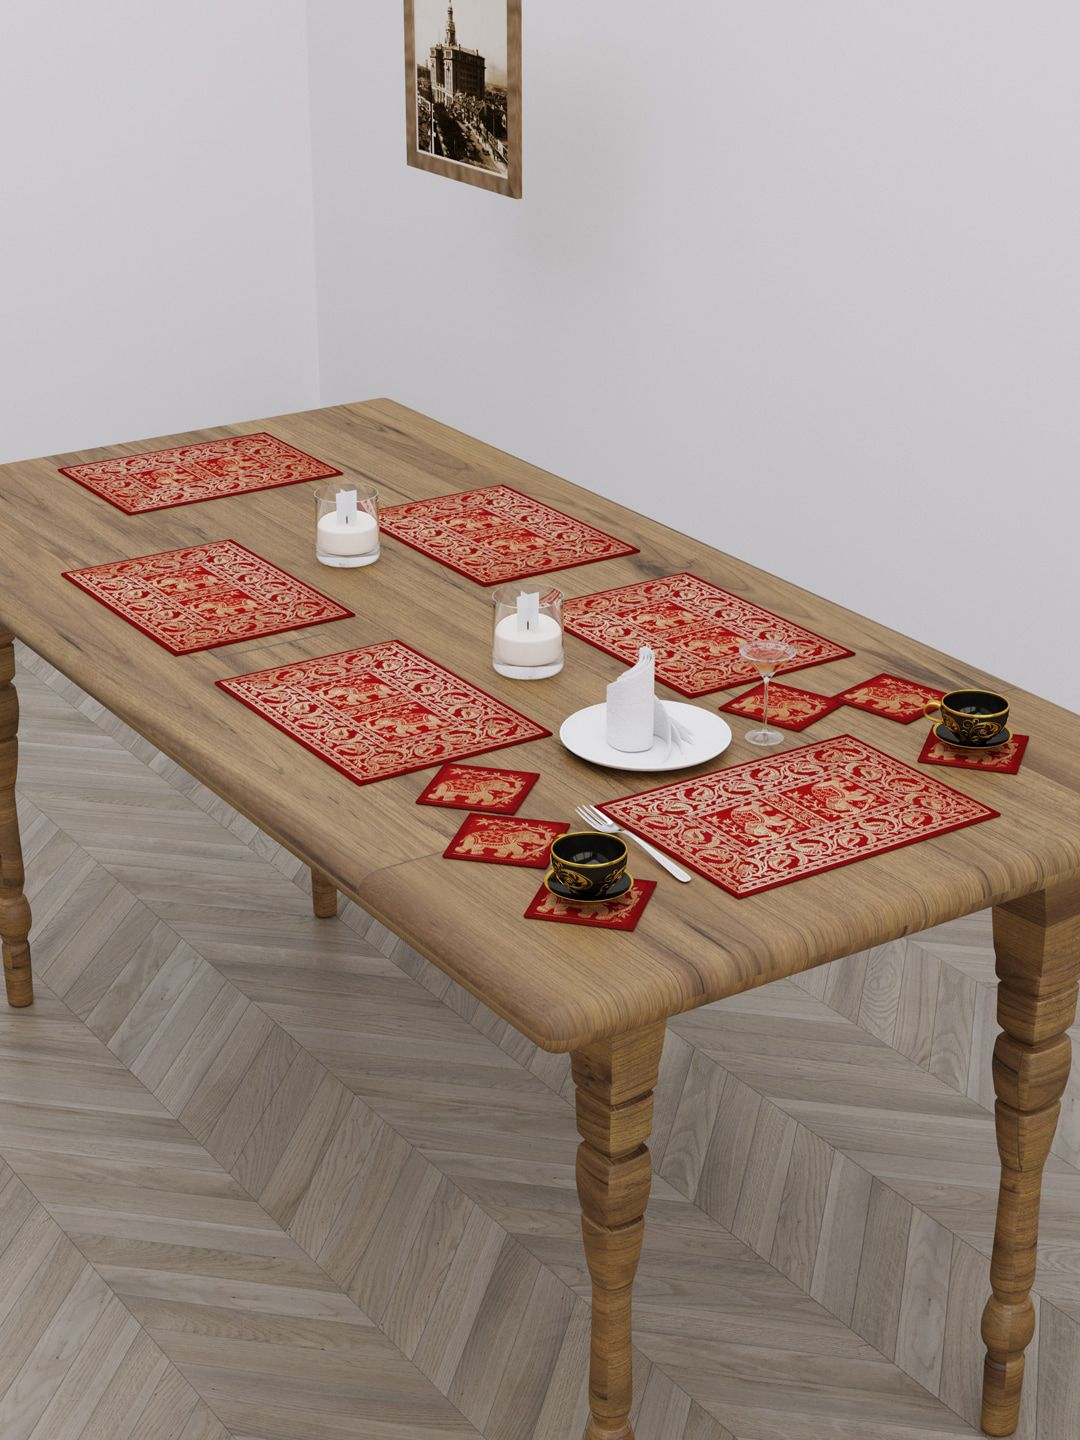 HOKIPO Set Of 12 Red Printed Jacquard Table Placements with Coasters Price in India